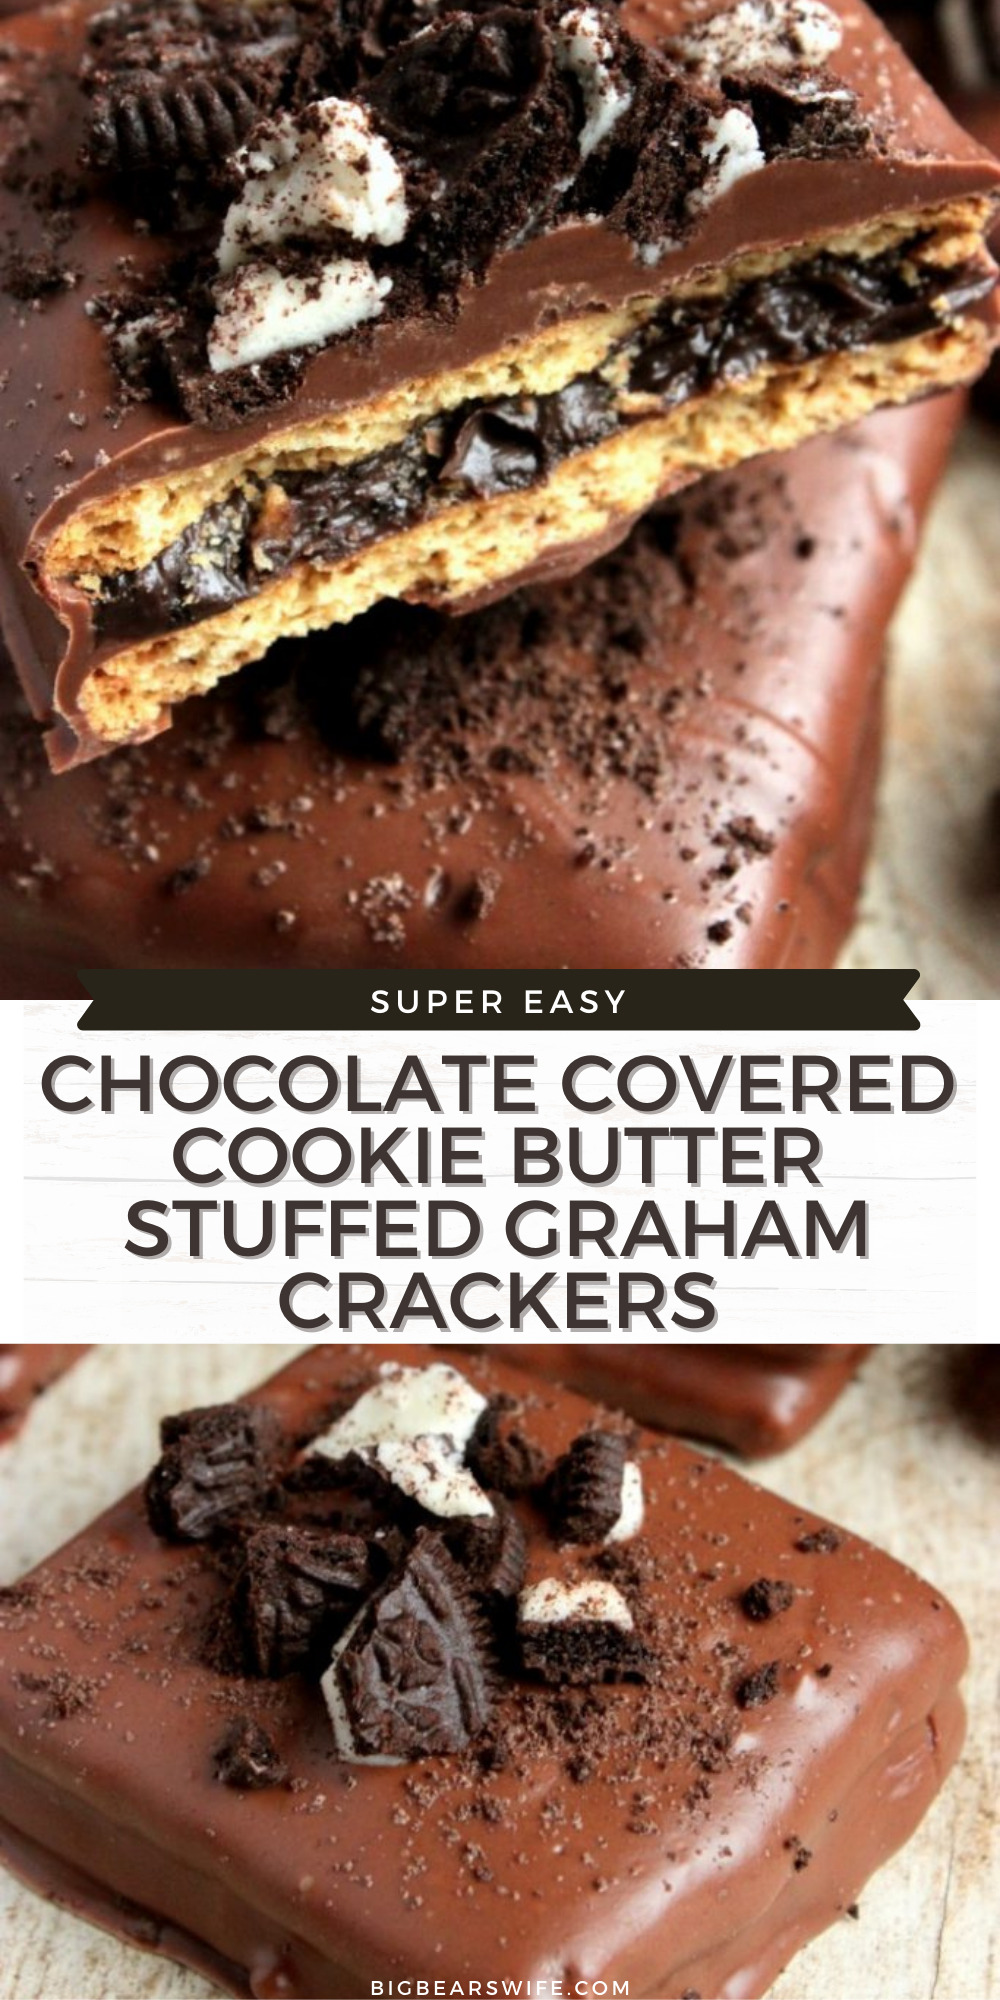 Chocolate Covered Cookie Butter Stuffed Graham Crackers - Chocolate Covered Graham Cracker Sandwiches that are graham crackers stuffed with a nice layer of cookie butter and topped with crushed Oreo cookies! A perfect chocolate treat for the chocolate and cookie butter lover in your life! via @bigbearswife